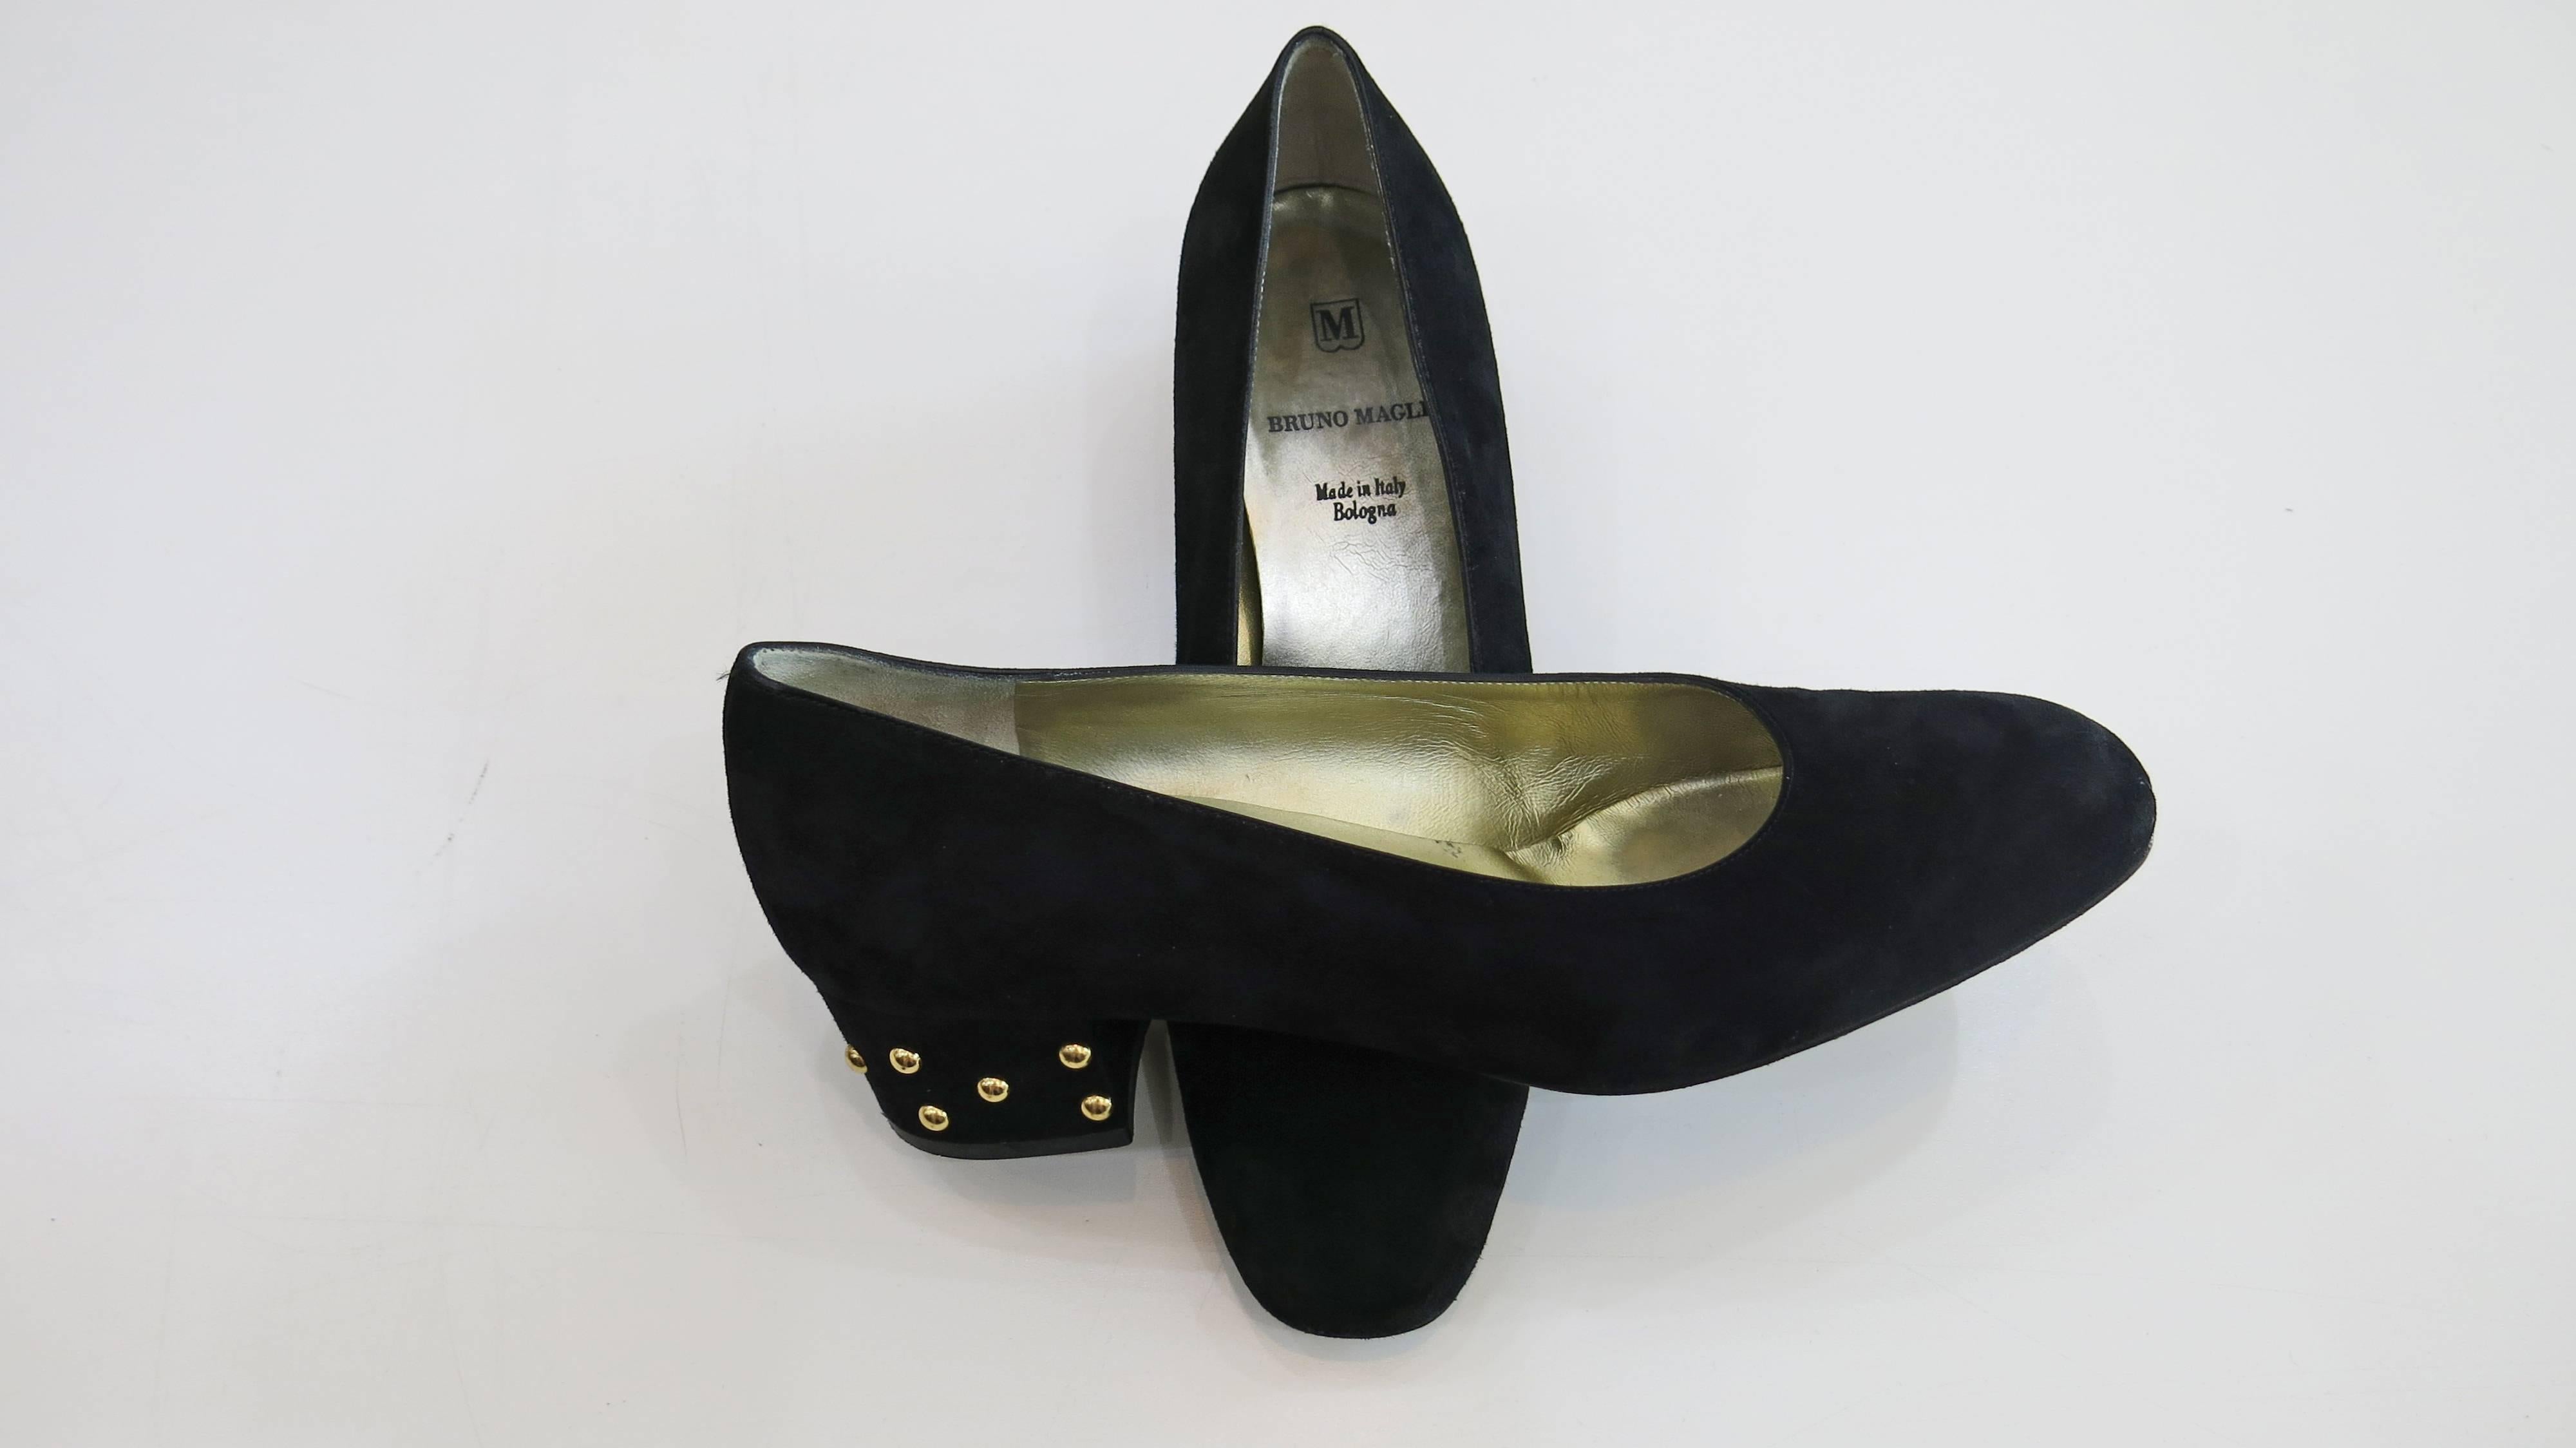 Black suede upper 2 inch heels with gold tone studs. Gold leather lining with brand stamp and black leather sole. Made in Italy. Some wear and discoloration on inside of the shoe. Some wear to the suede as well as minor loss of color on the outside